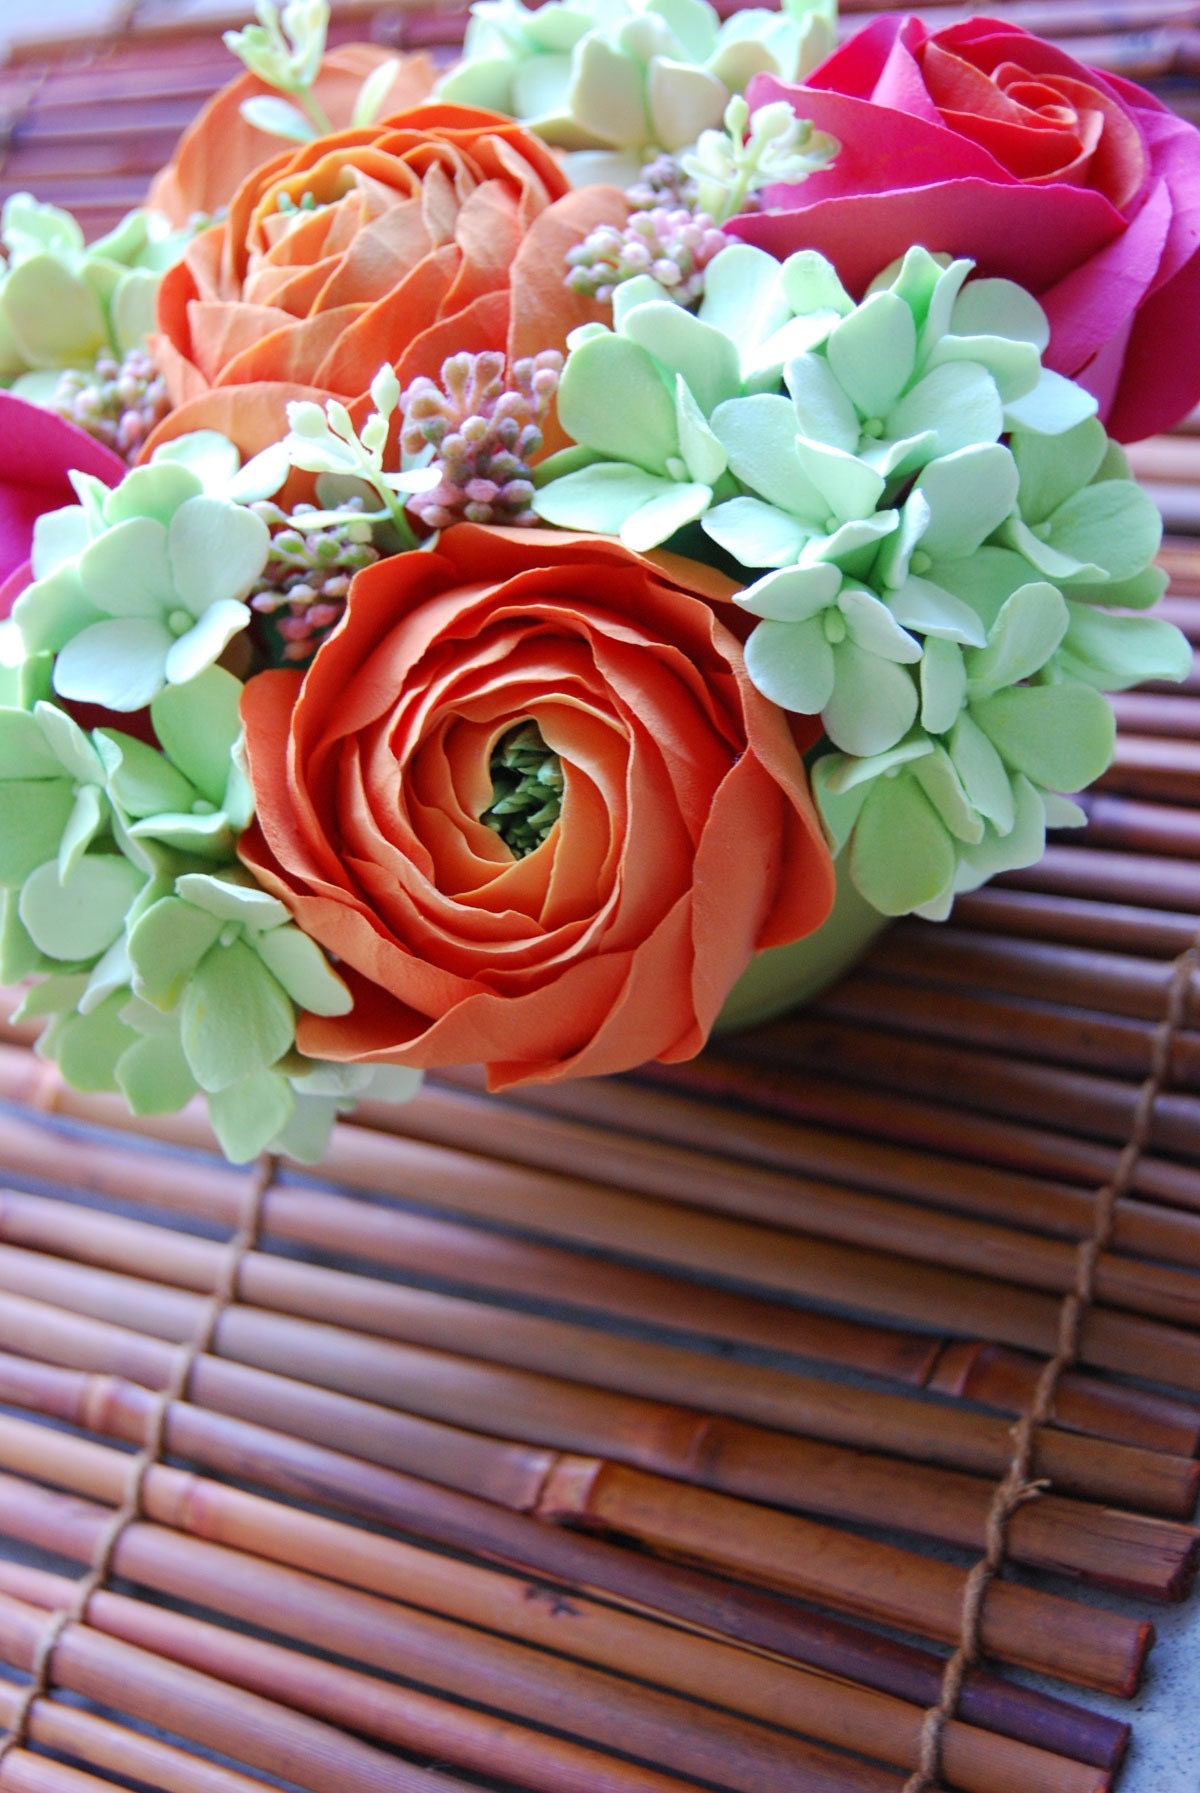 Spring Flowers - Oranges, Pinks and Greens